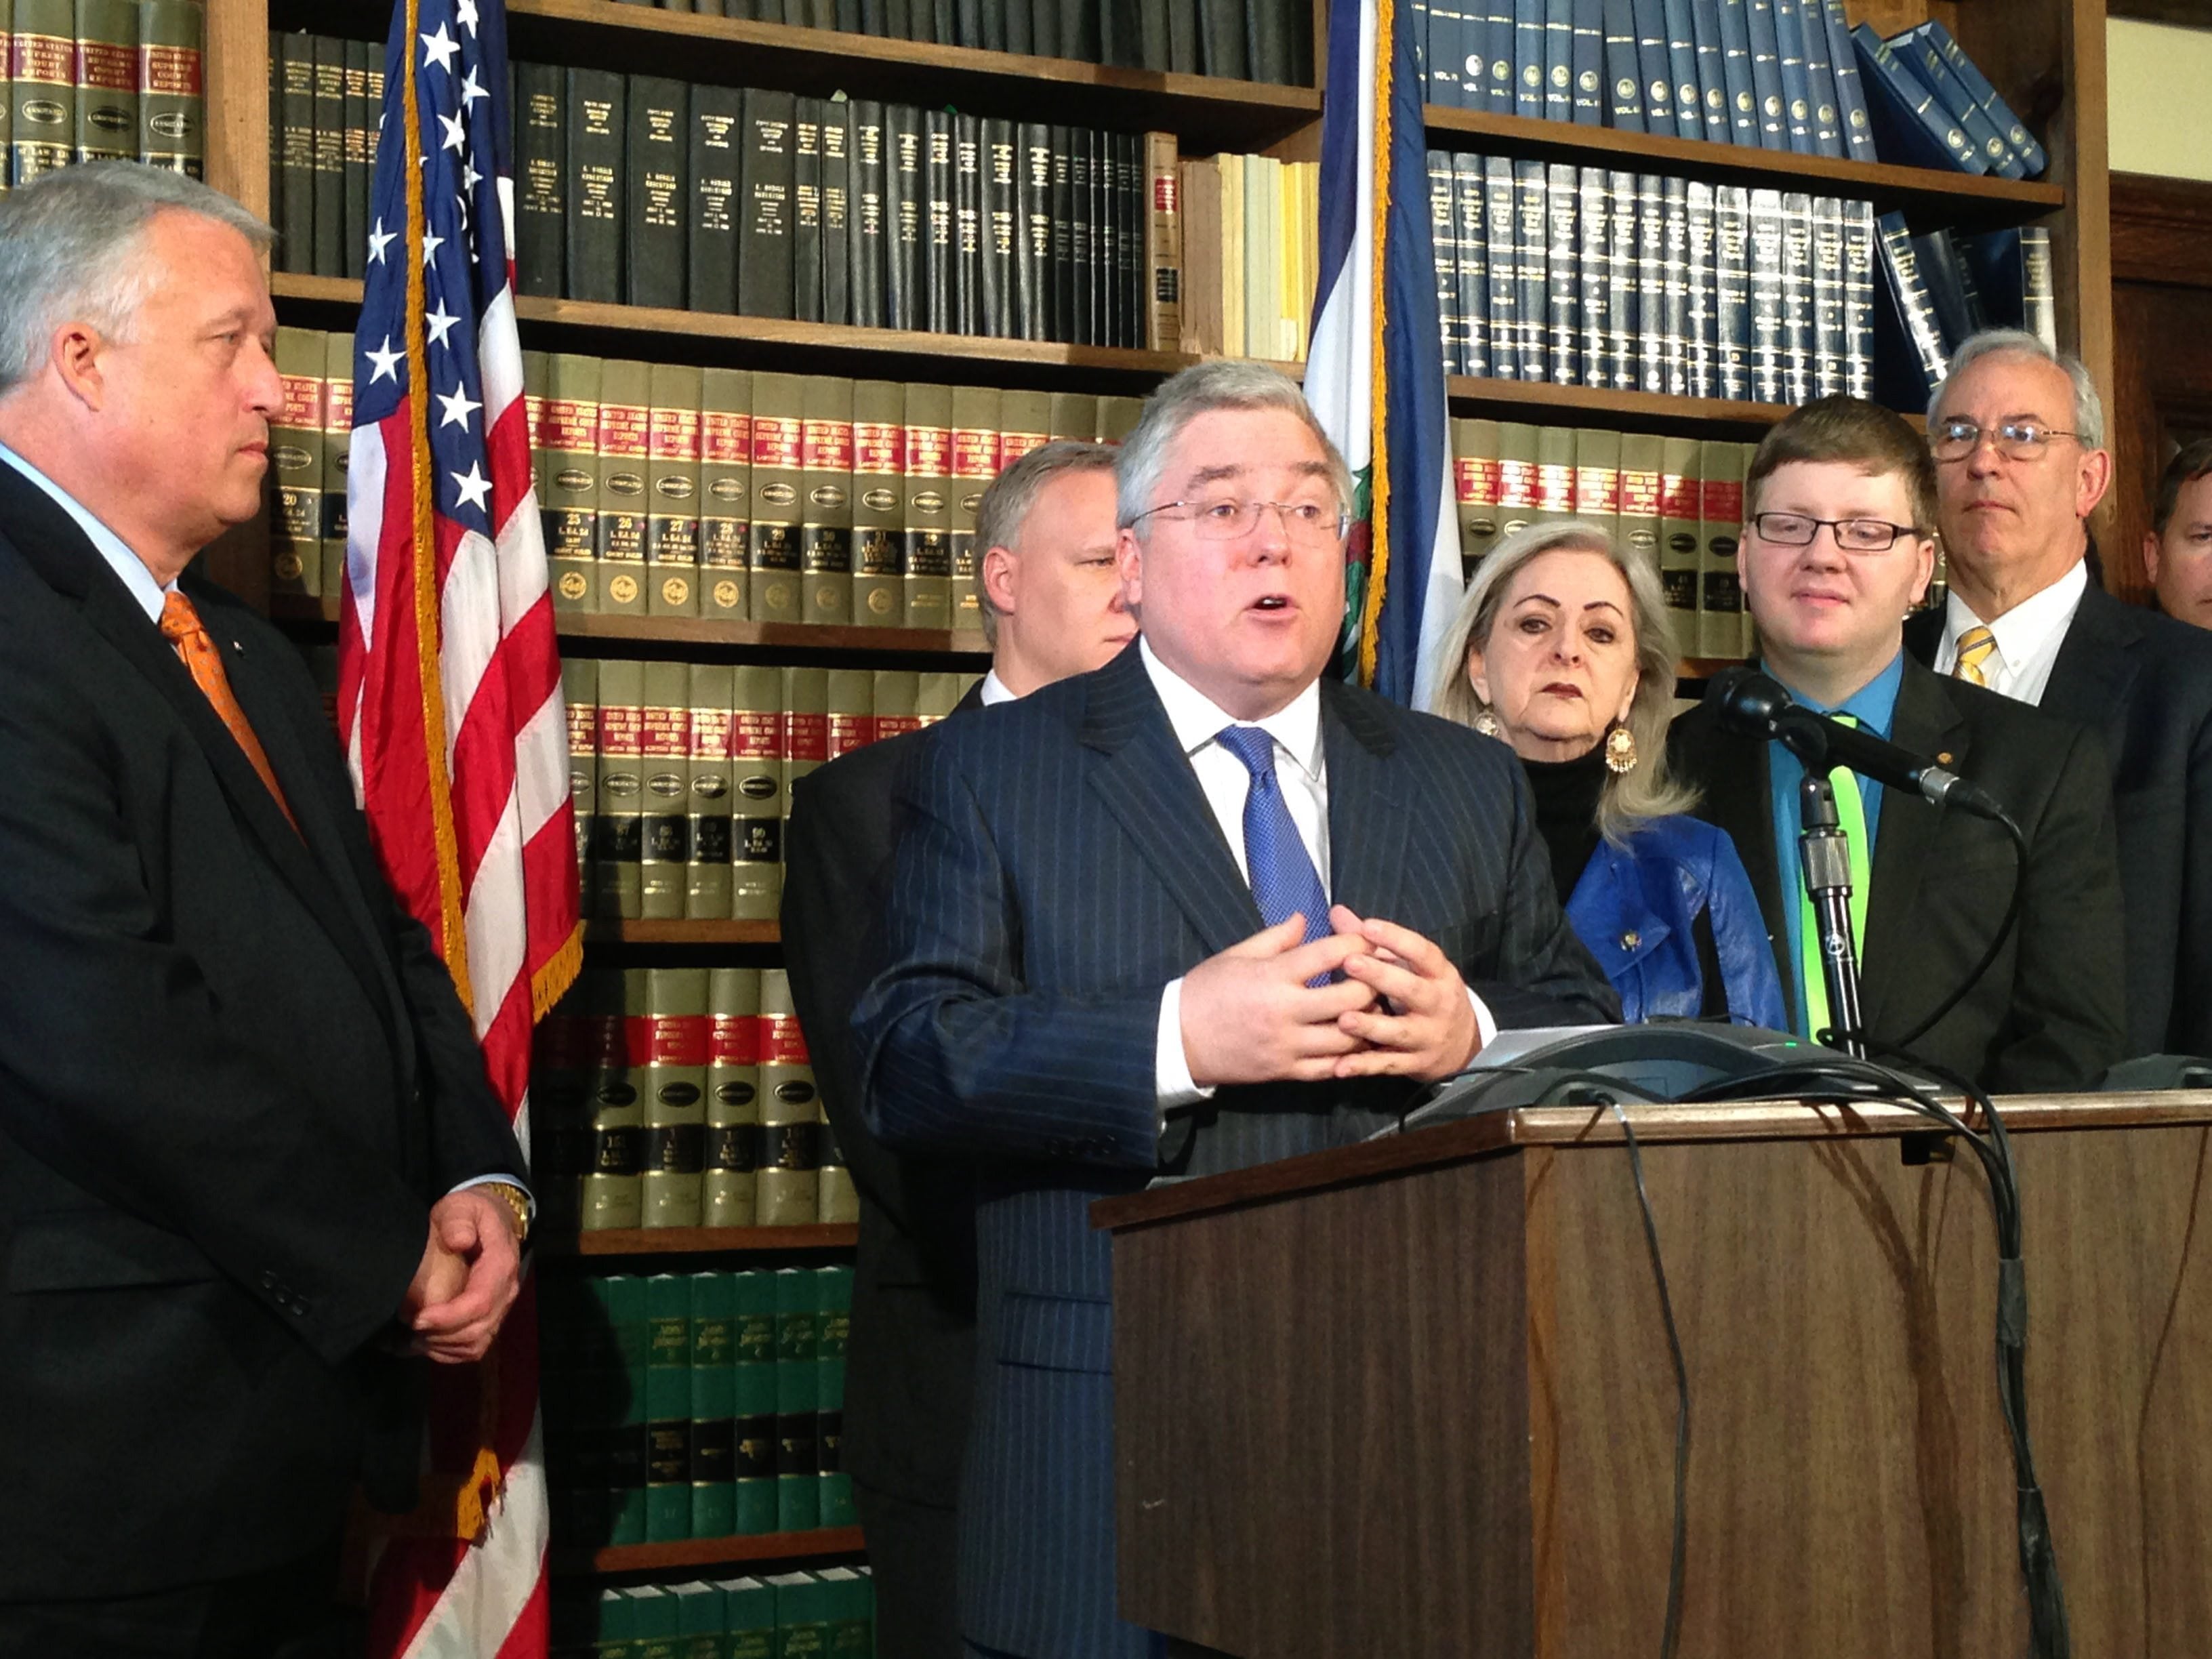 West Virginia Attorney General Patrick Morrisey speaks at a news conference Wednesday, Feb. 10, 2016, at the state Capitol in Charleston, West Virginia. Coal-dependent West Virginia is helping lead the legal fight against the Obama administration&#039;s sweeping plan to address climate change. Morrisey hailed the U.S. Supreme Court&#039;s decision Tuesday to halt enforcement of the plan.